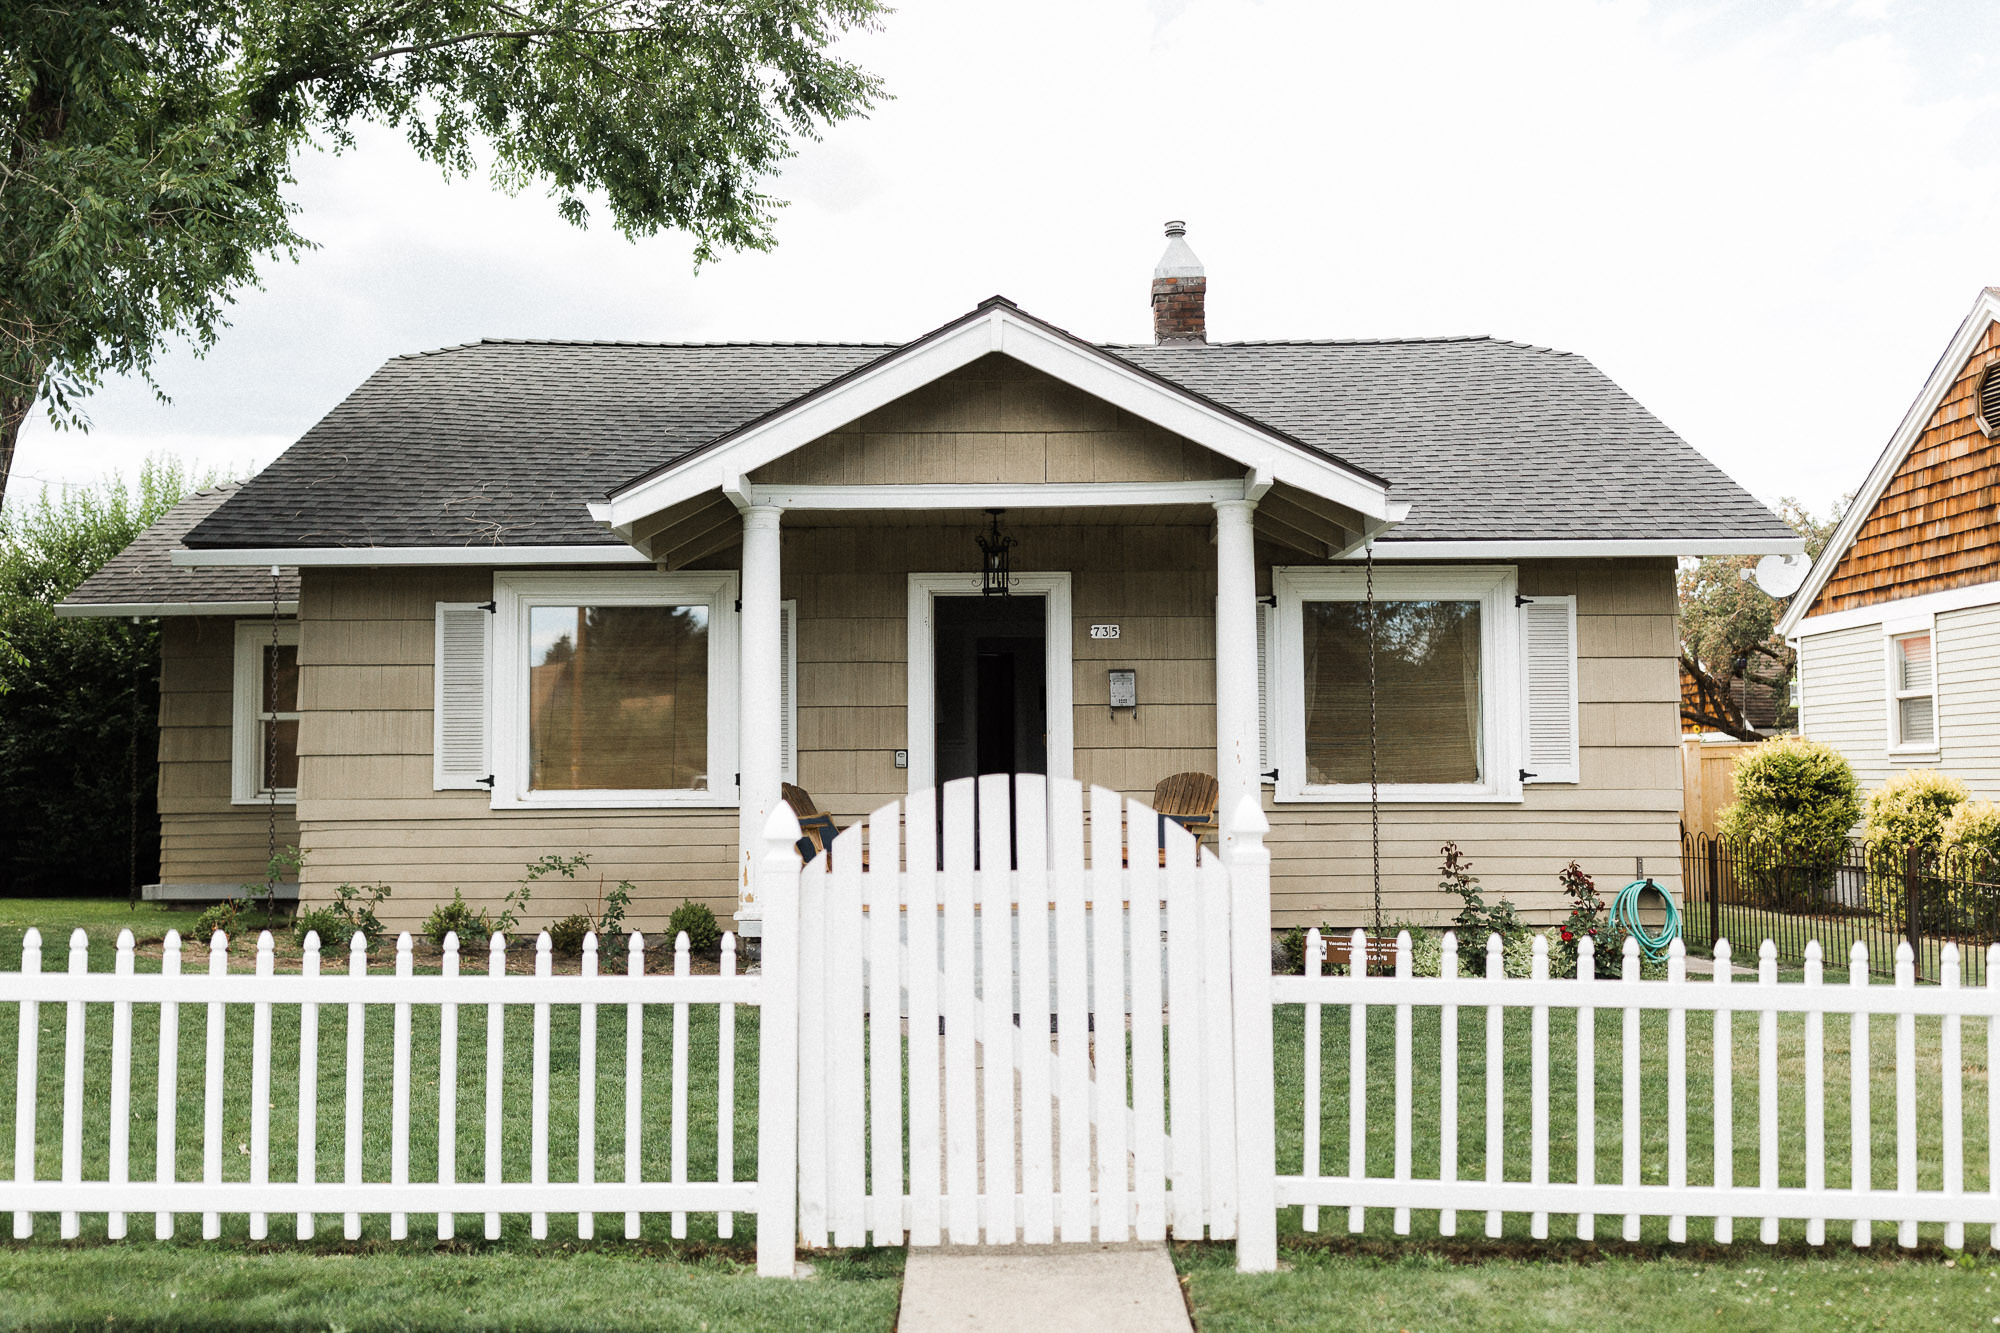 Craftsman style cottage with white picket fence in Bend, Oregon